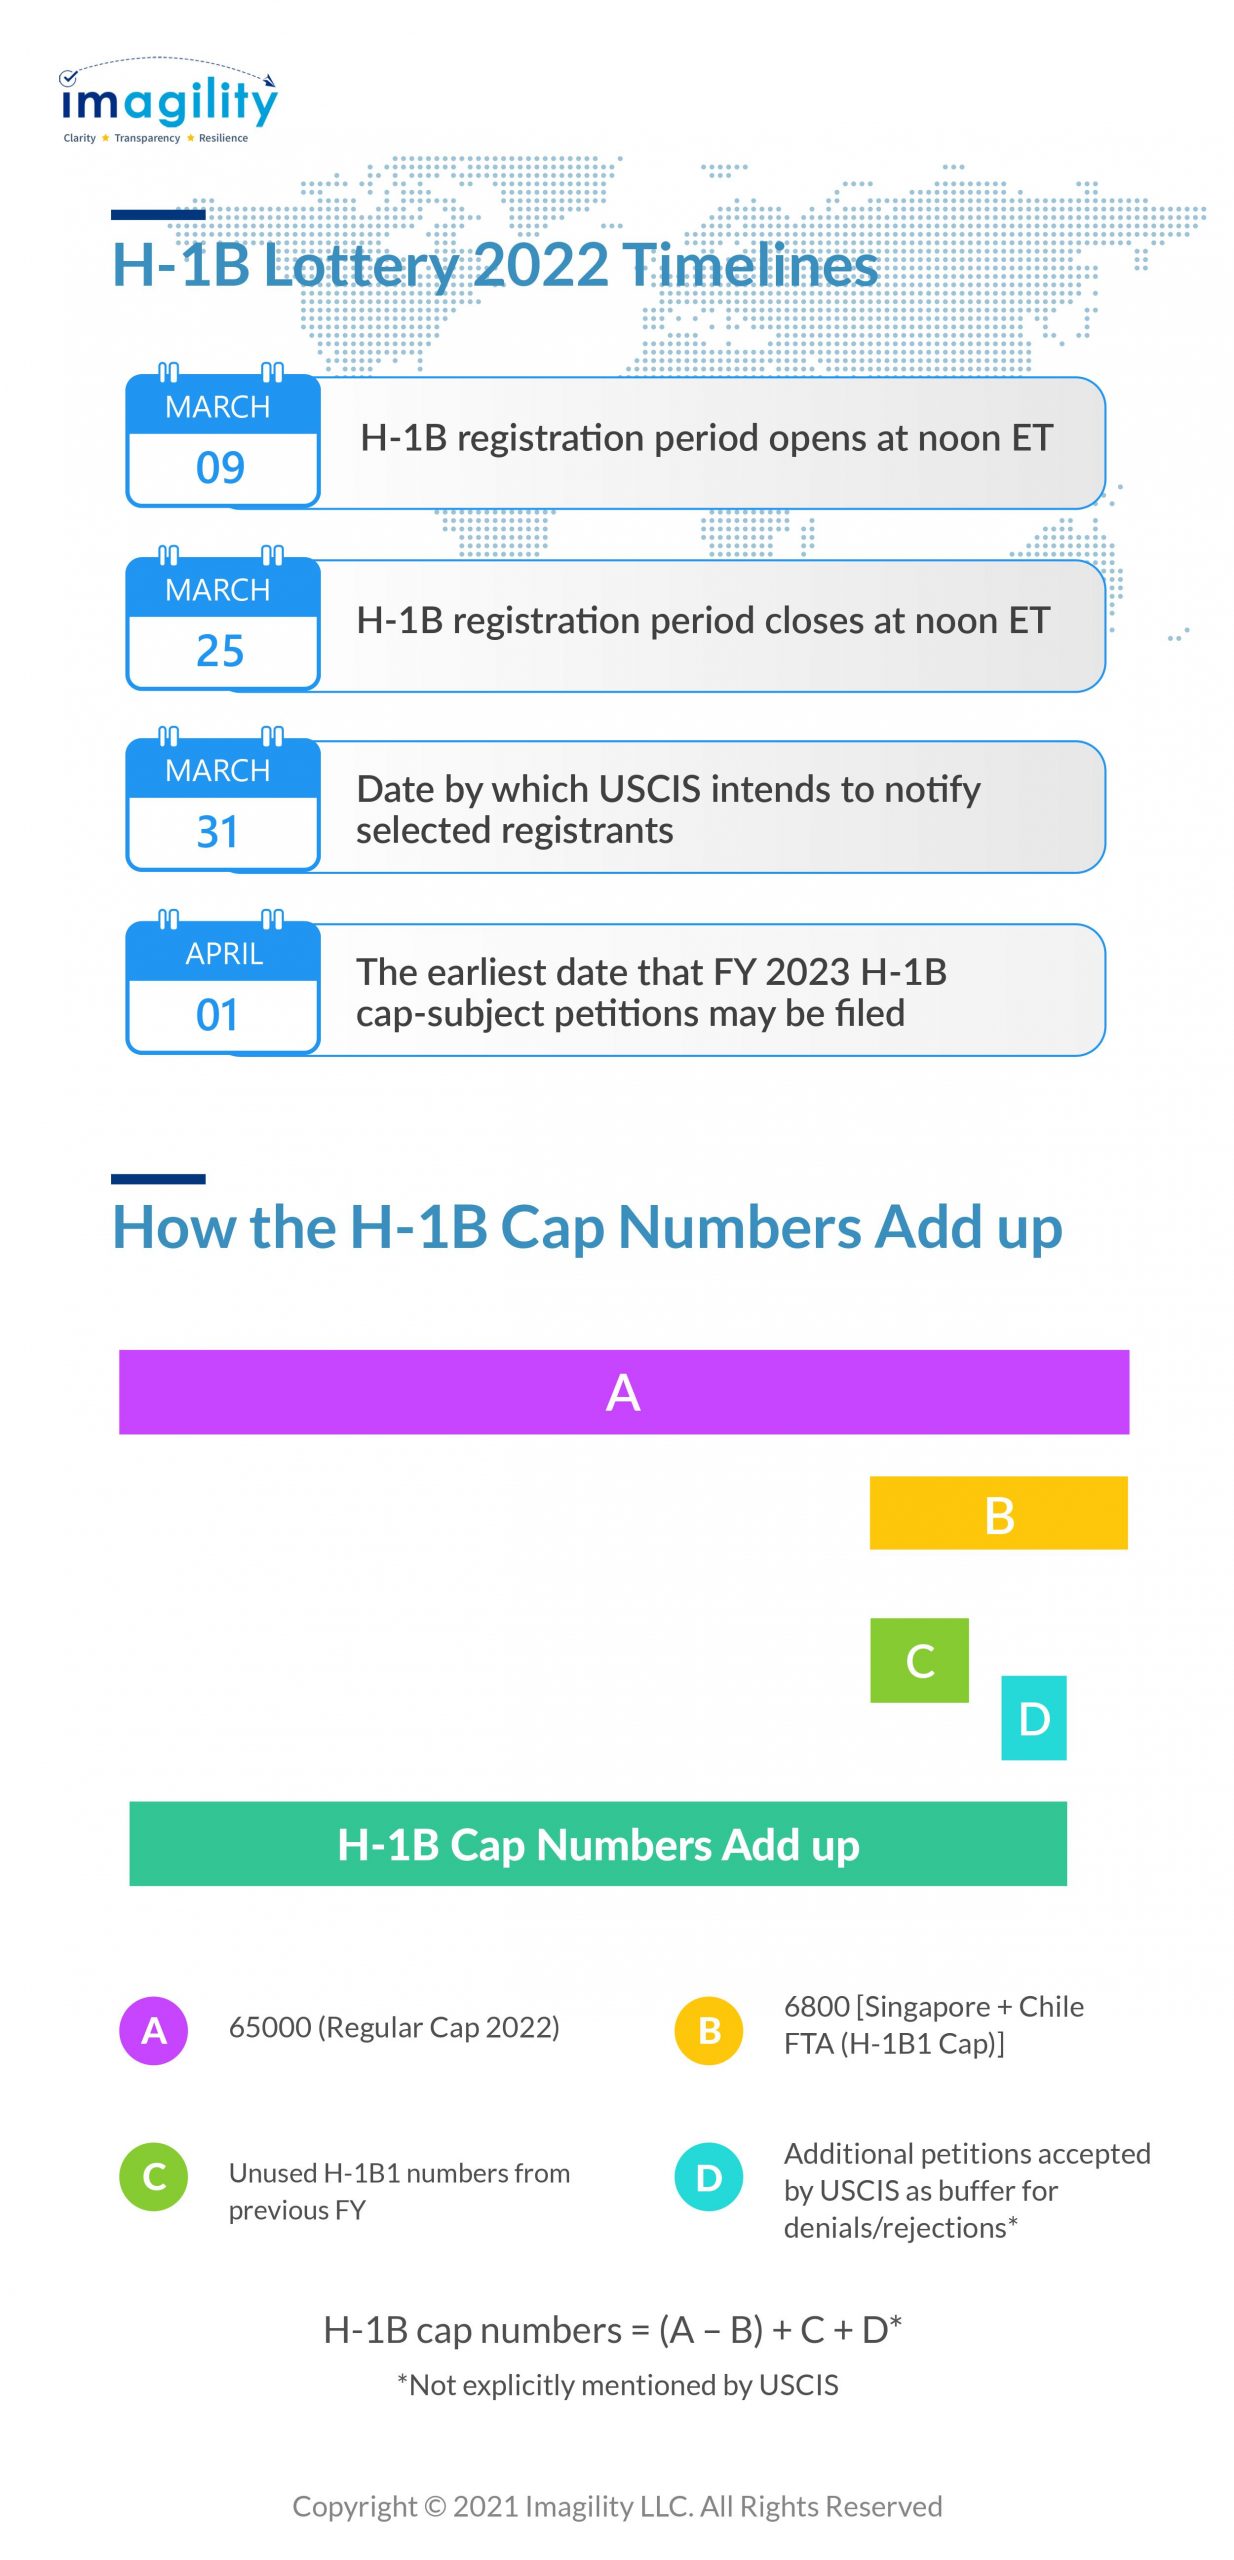 H-1B Lottery Timelines